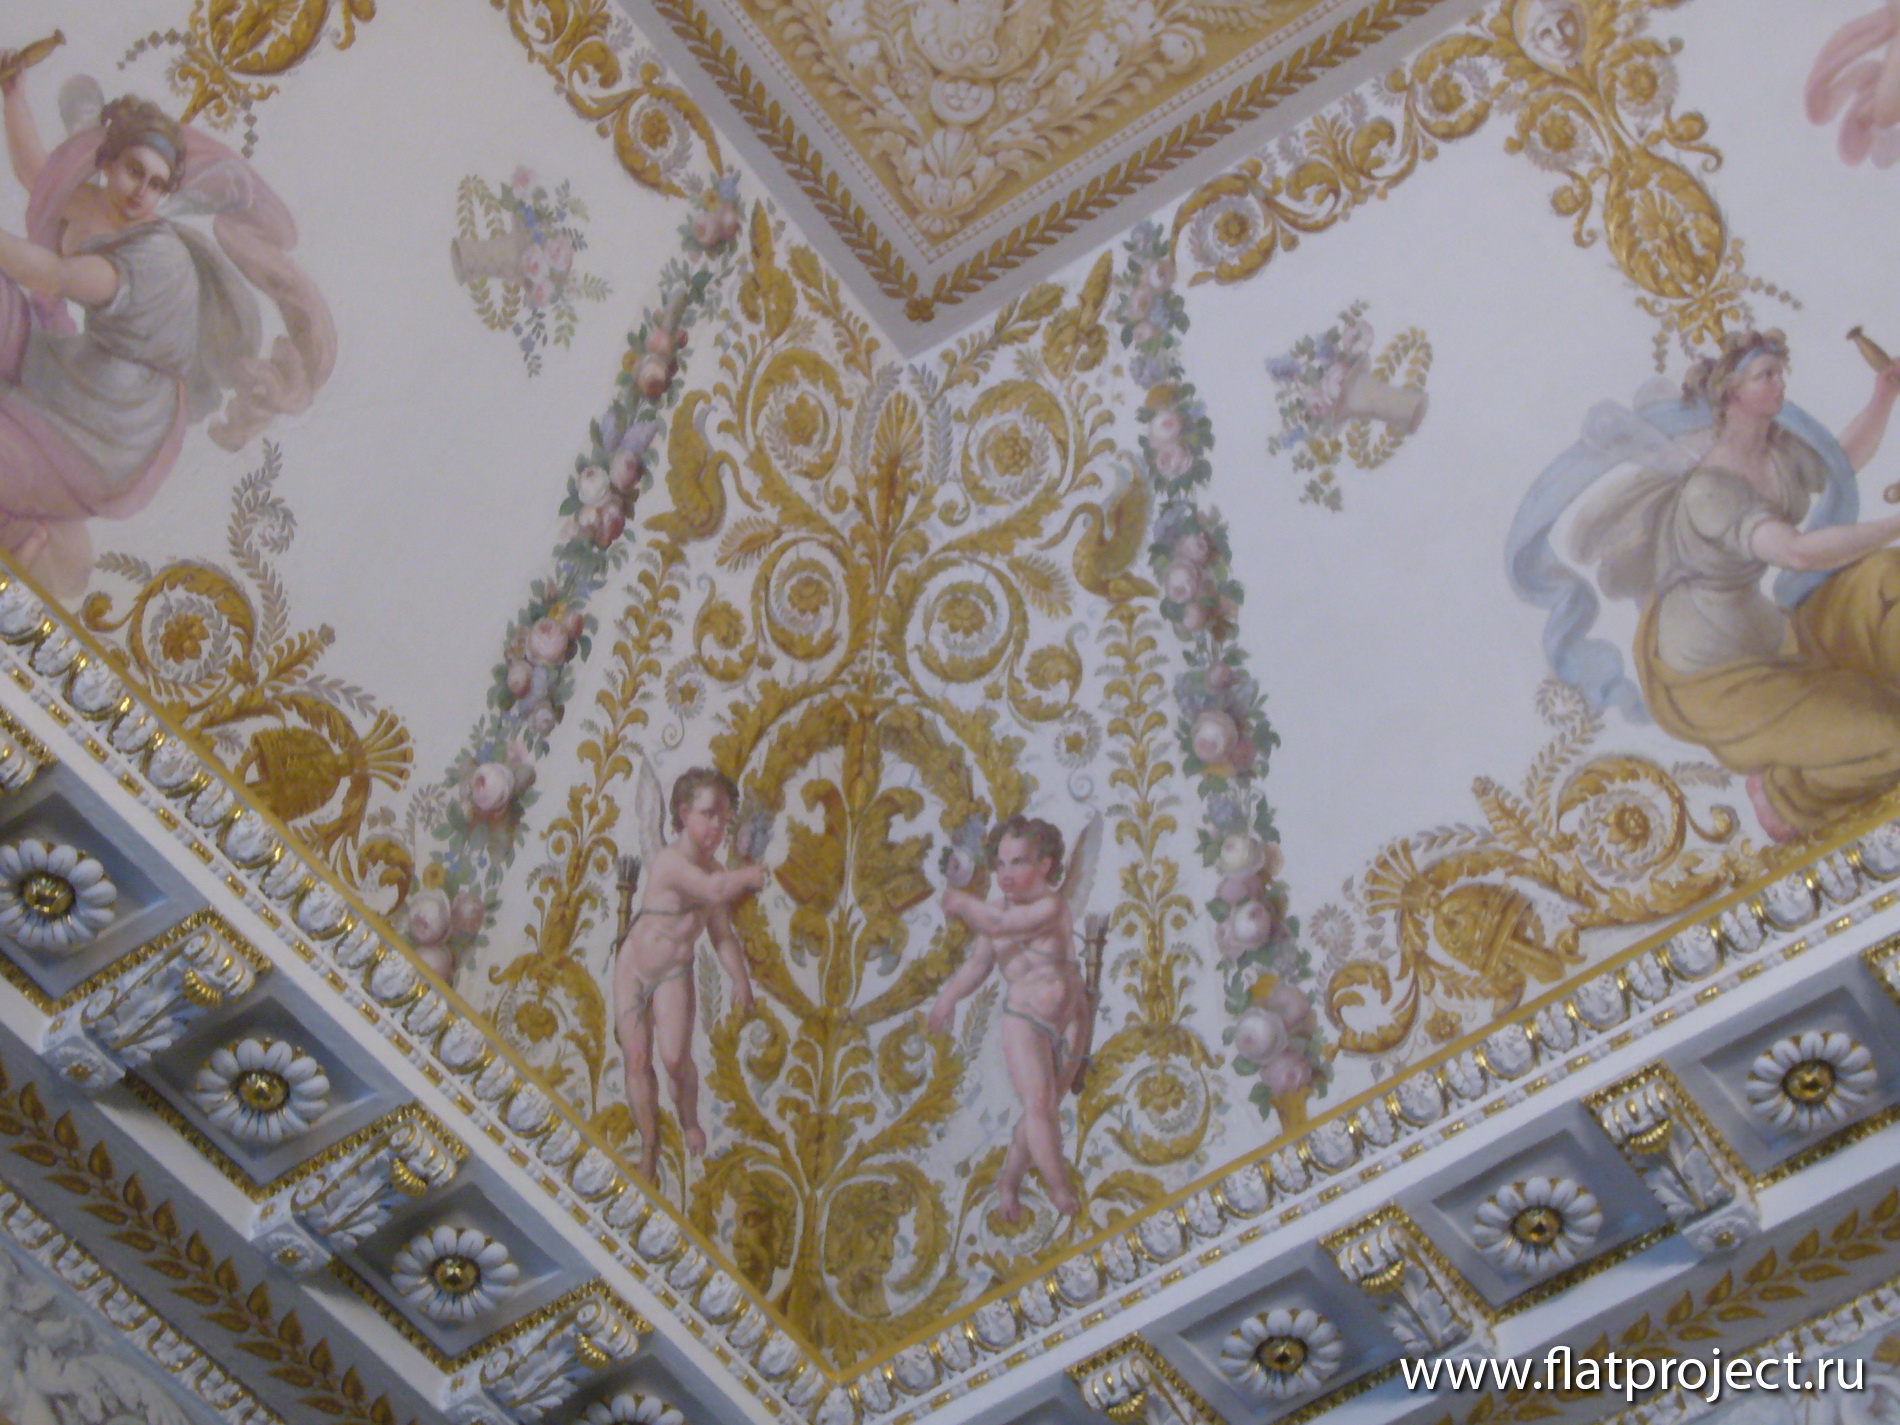 The State Russian museum interiors – photo 56